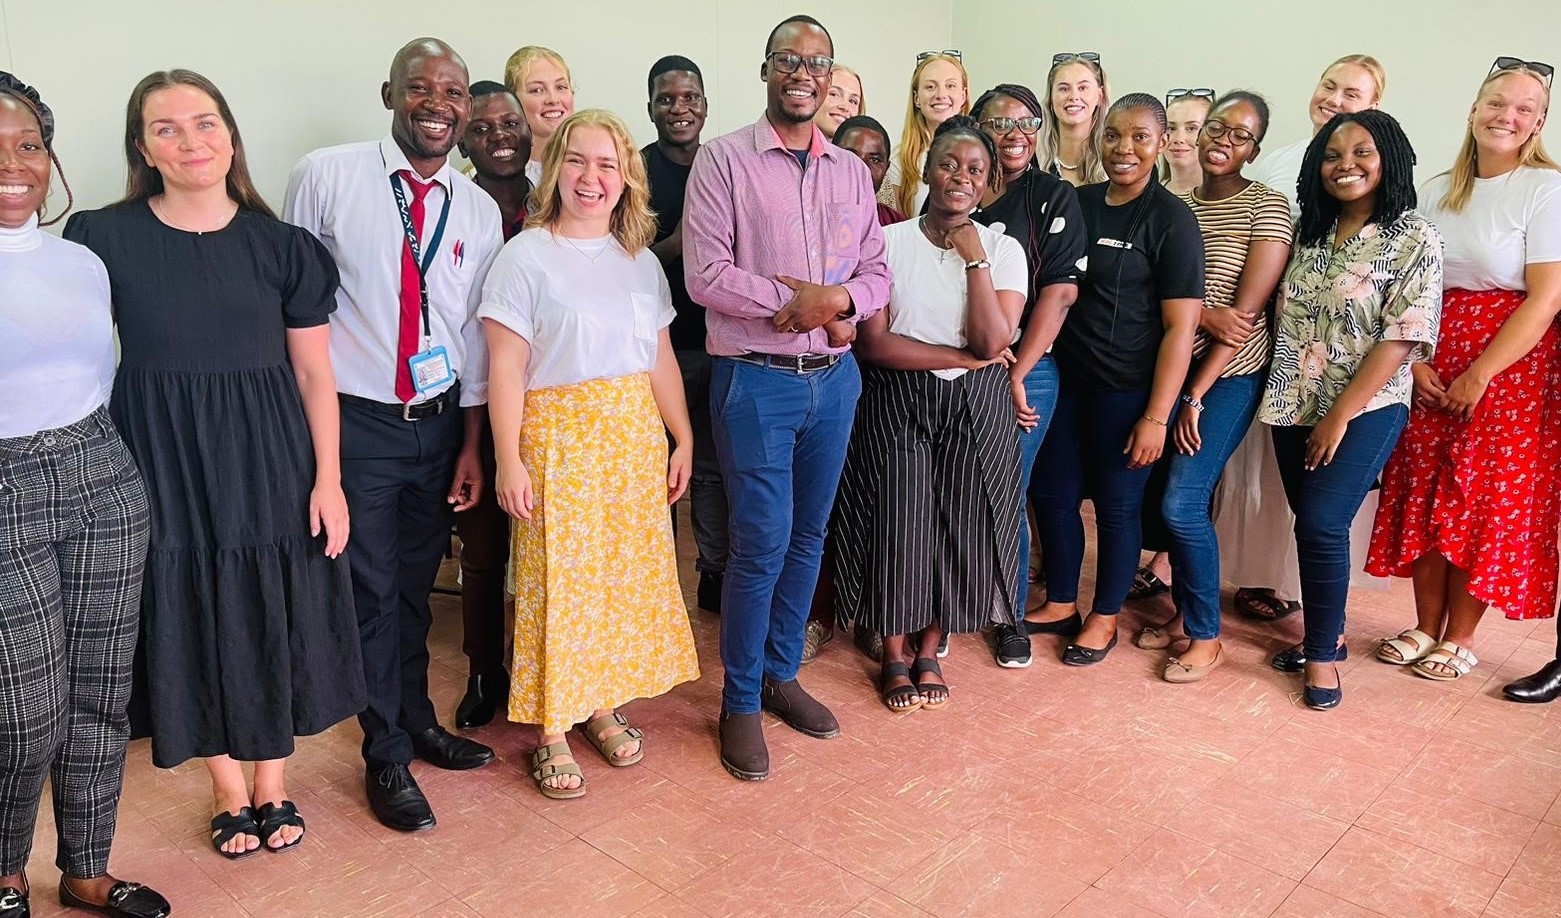 Students from Oslomet University during an interaction session with students from UNZA-SoN. In the Middle Mr Michael Kanyanta the Exchange Programme Coordinator UNZA-SoN